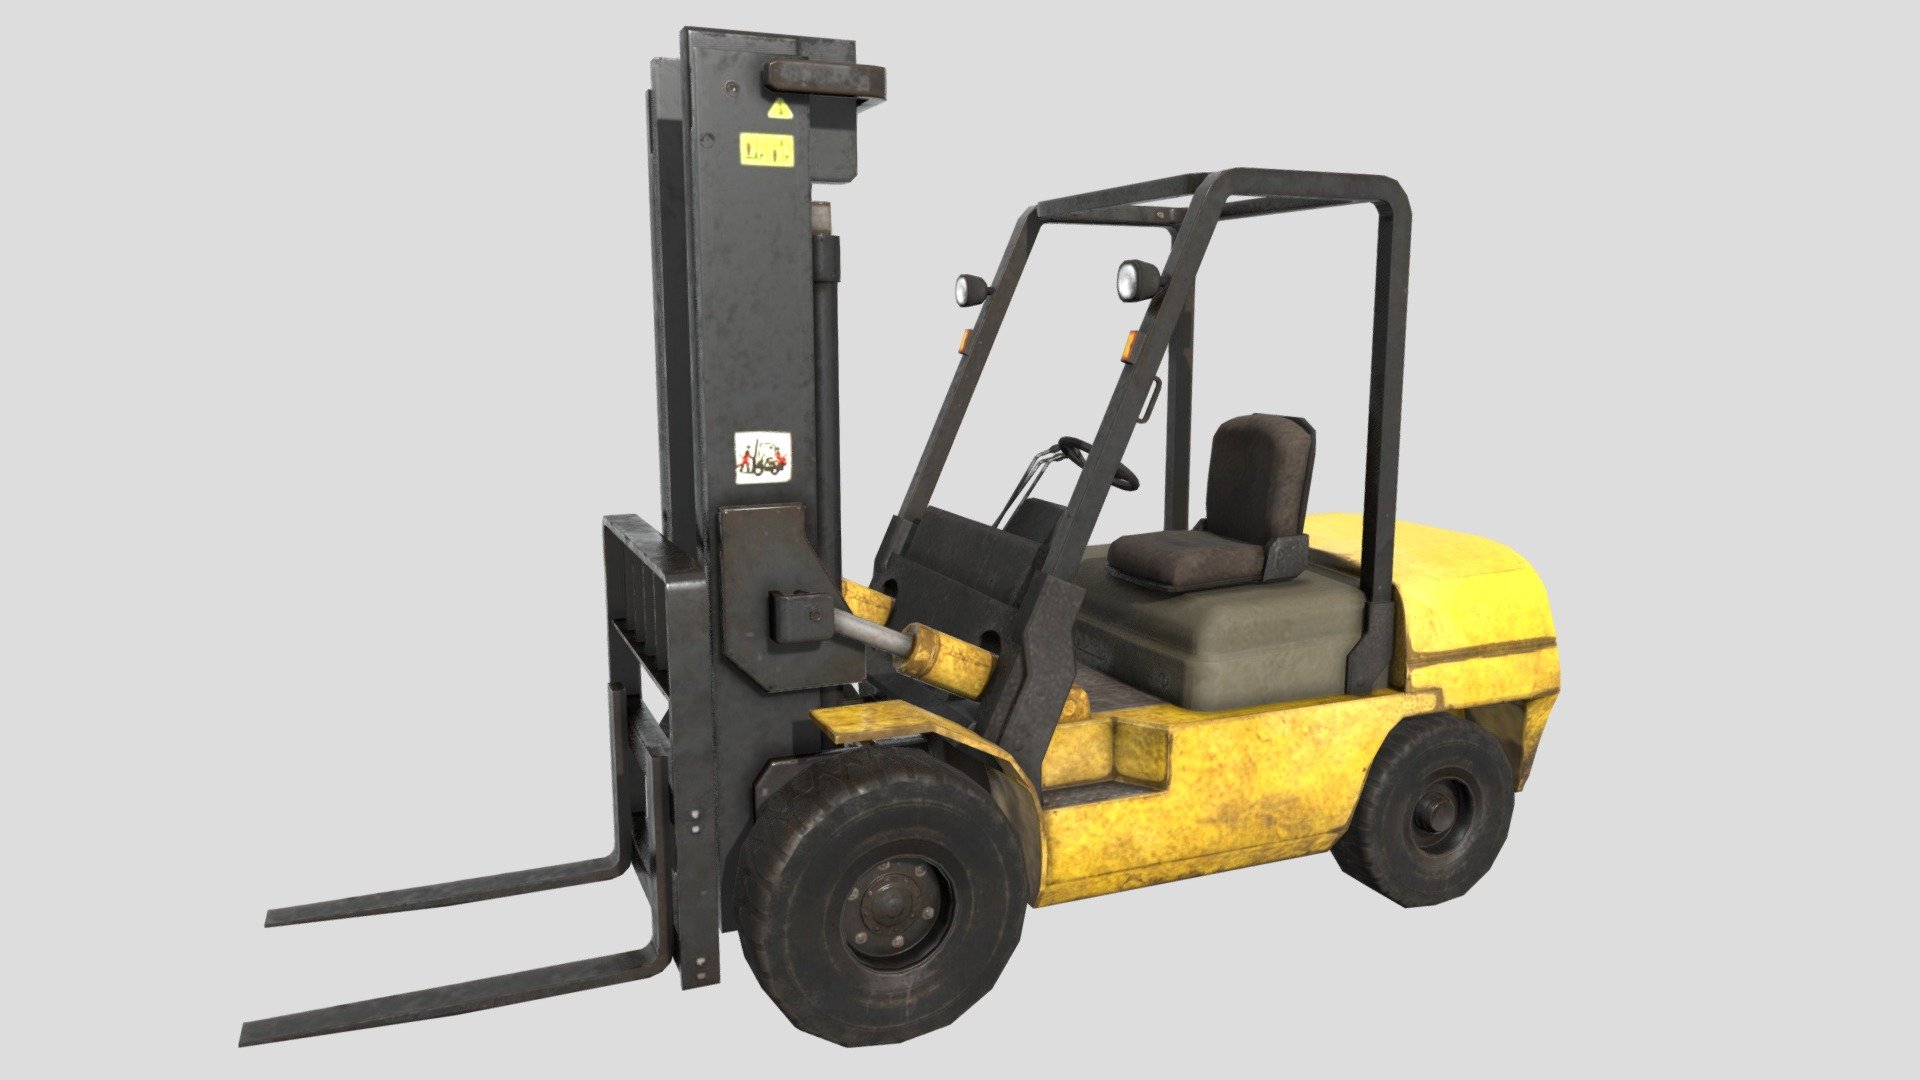 Forklift Truck
The model has an optimized low poly mesh with the greatest possible number of simplifications that do not affect photo-realism but can help to simplify it, thus lightening your scene and allowing for using this model in real-time 3d applications.

Real-world accurate model.  In this product, all objects are ERROR-FREE and All LEGAL Geometry. Subdivisions are not required for this product.

Perfect for Architectural, Product visualization, Game Engine, and VR (Virtual Reality) No Plugin Needed.

Format Type




3ds Max 2017 (standard shader)

FBX

OBJ

3DS

Texture

1 material used. 1 different sets of textures:




Diffuse

Normal

Specular

Gloss

AO

Emissive

Specular n Gloss [.tga additional texture]

You might need to re-assign textures map to model in your relevant software - Forklift Truck - Buy Royalty Free 3D model by luxe3dworld 3d model